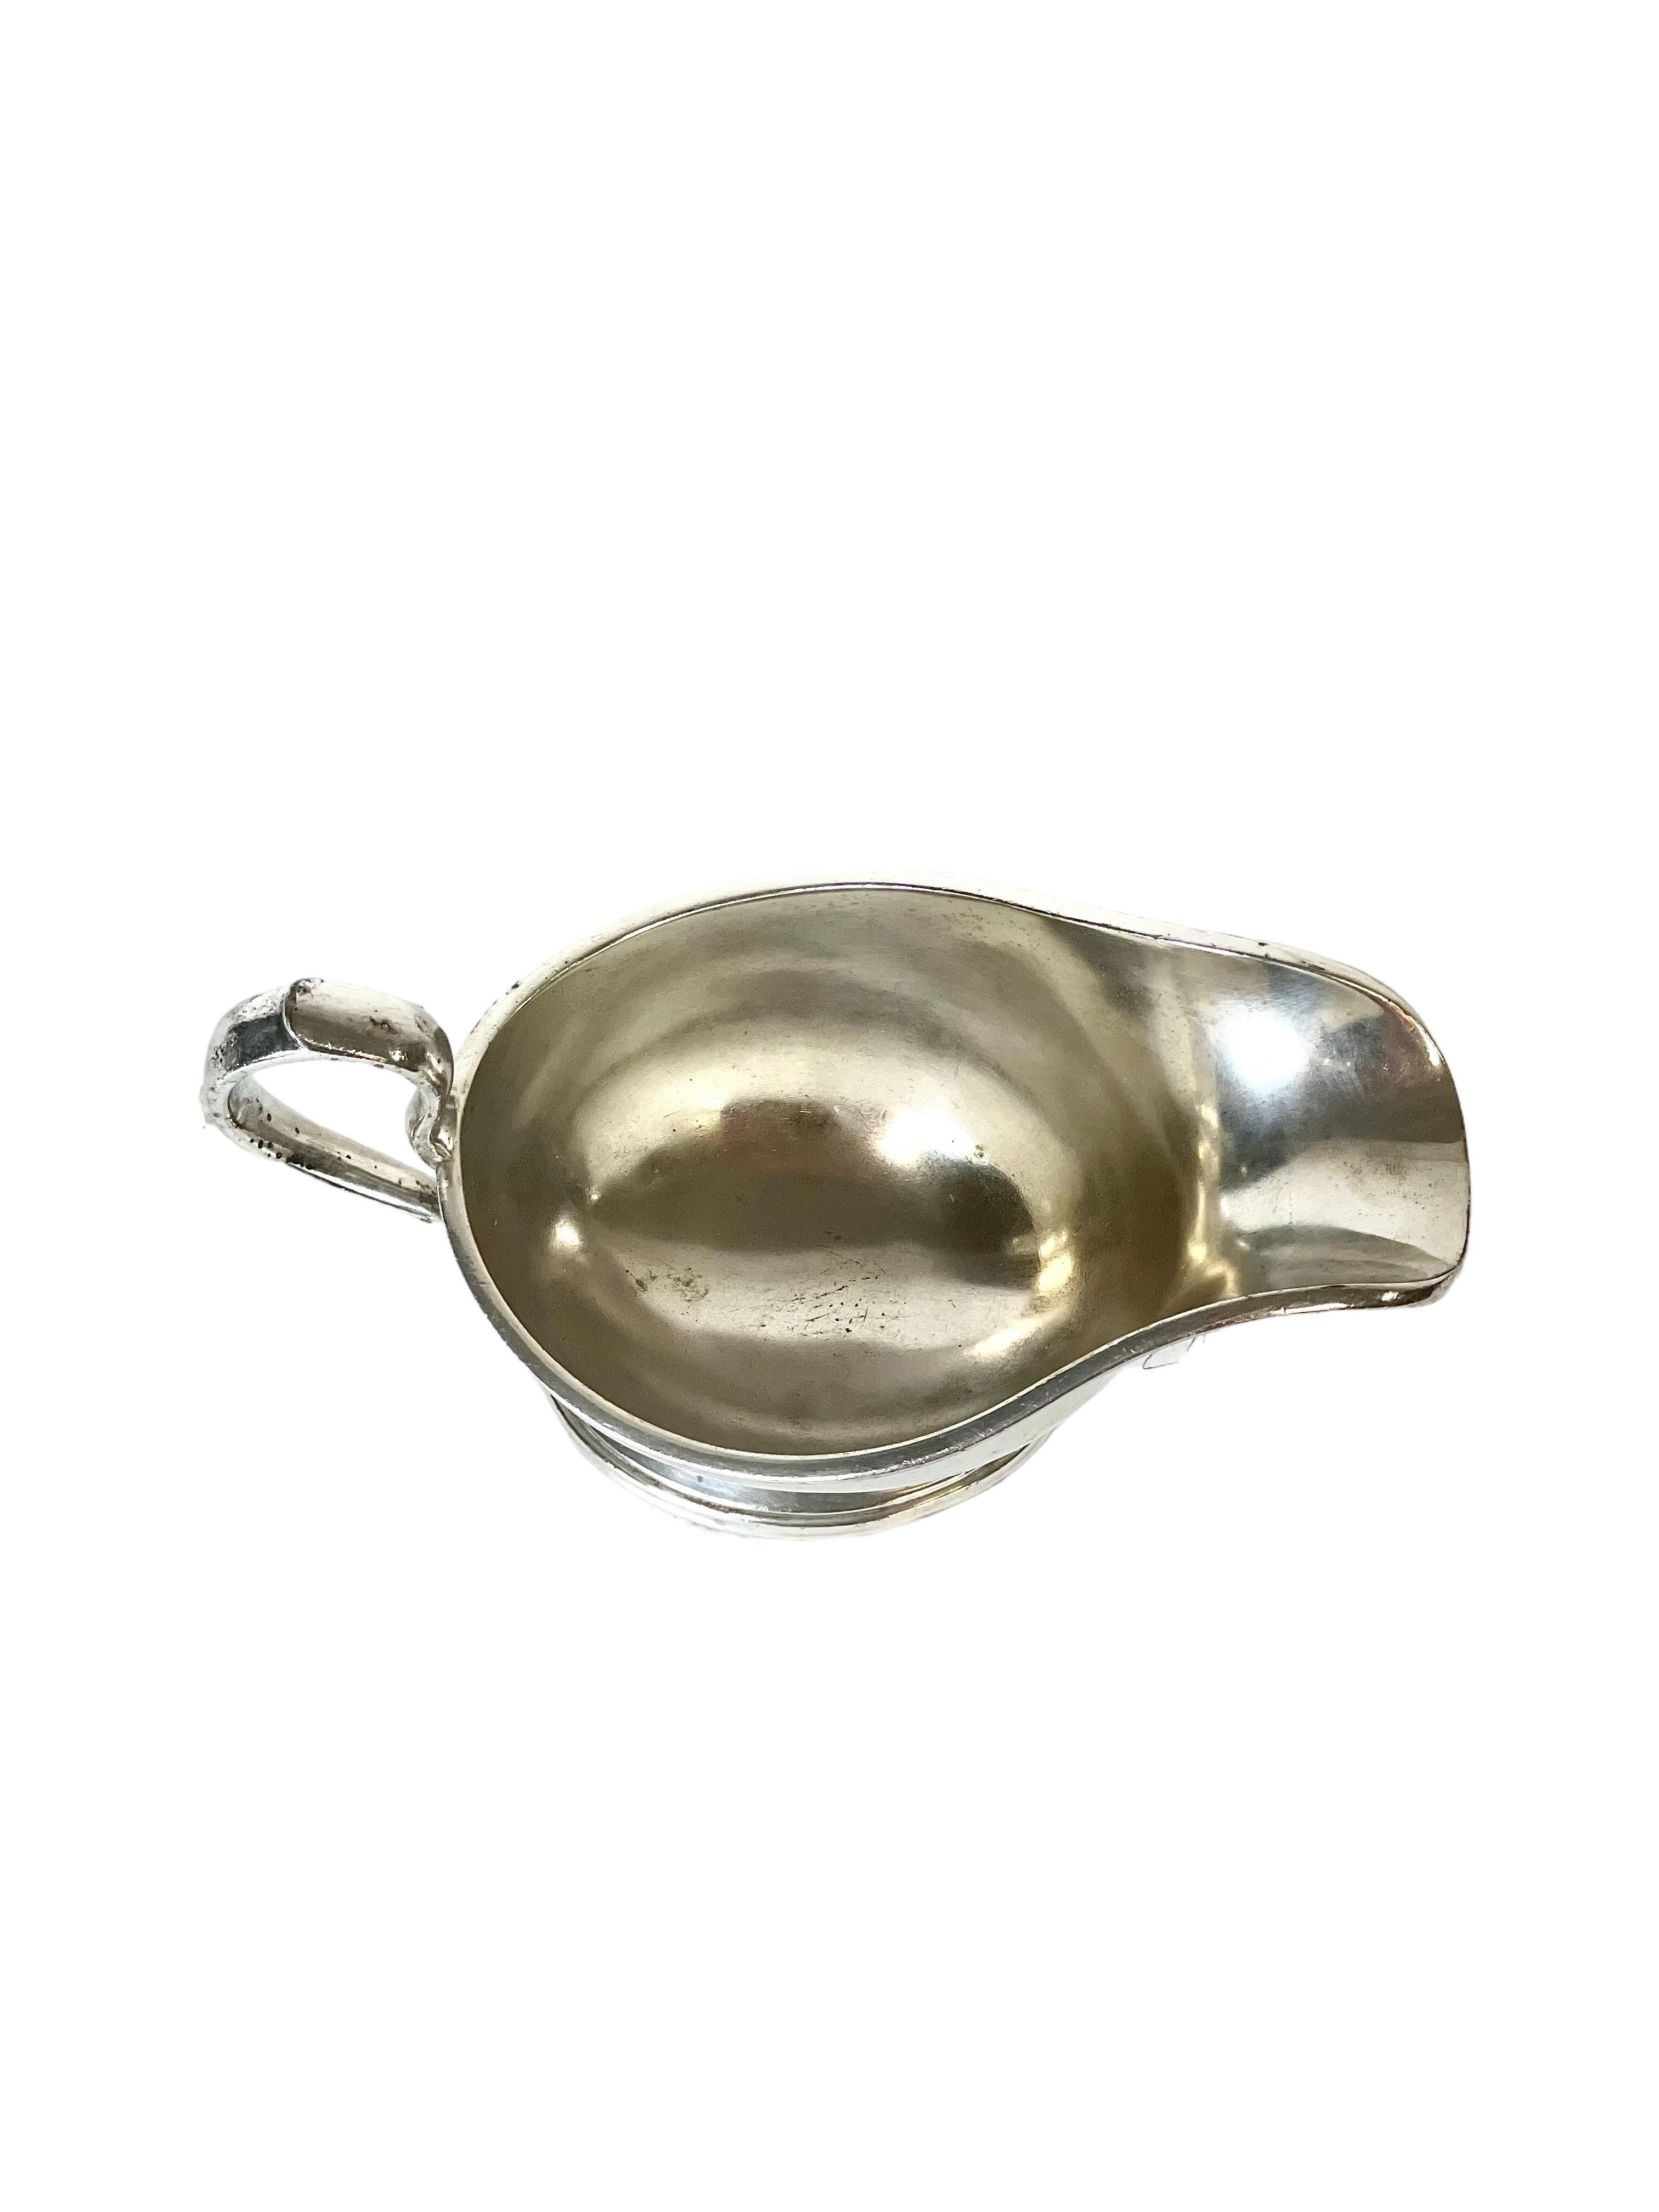 French Silver-Plated Gravy or Sauce Boat from the Hotel Juana For Sale